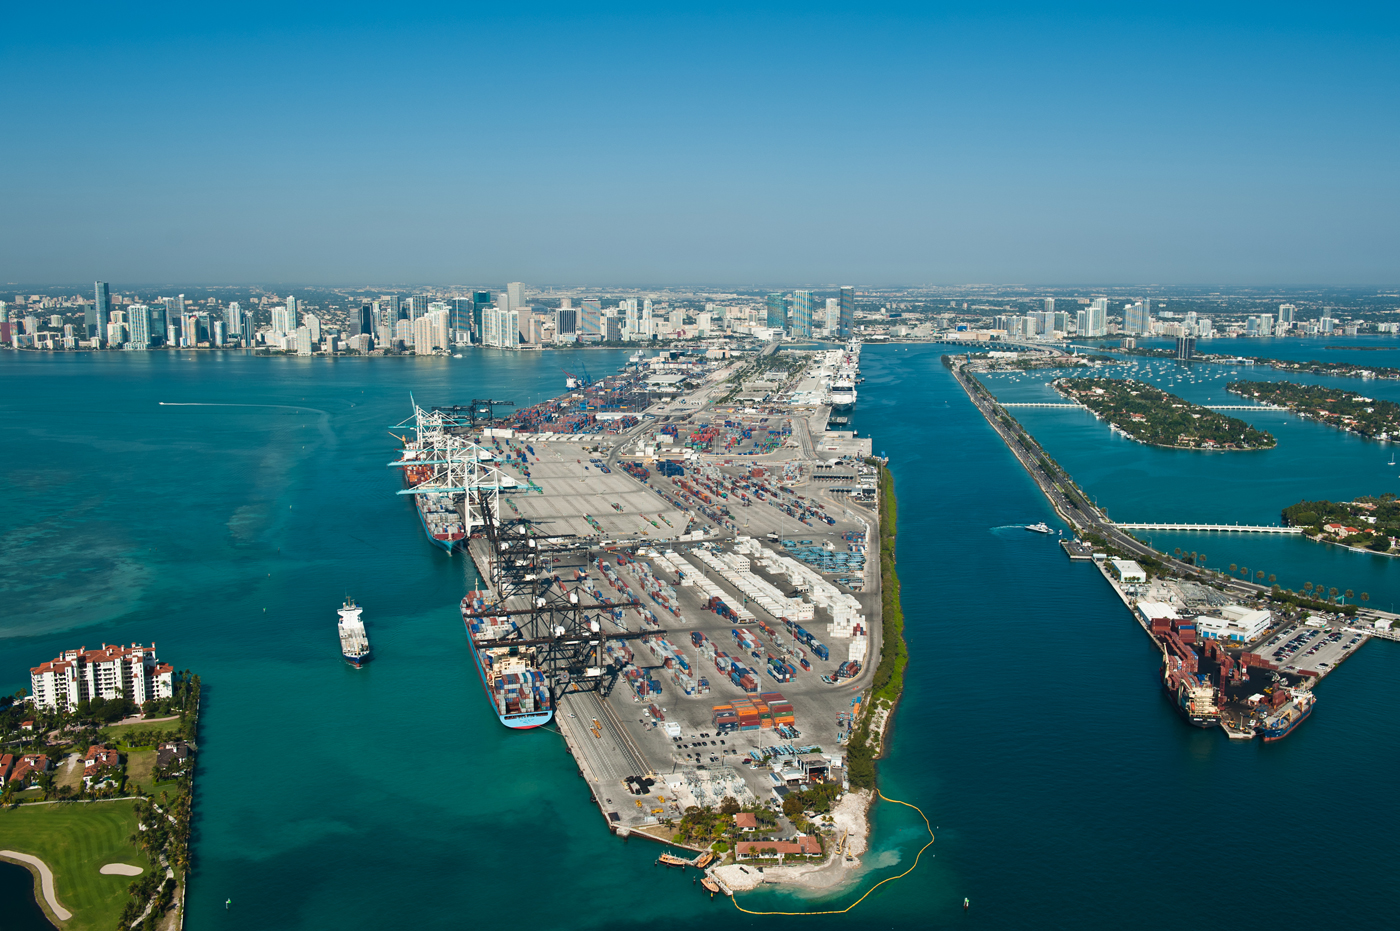 Will PortMiami keep its hold on their title as Cruise Capital of the World?